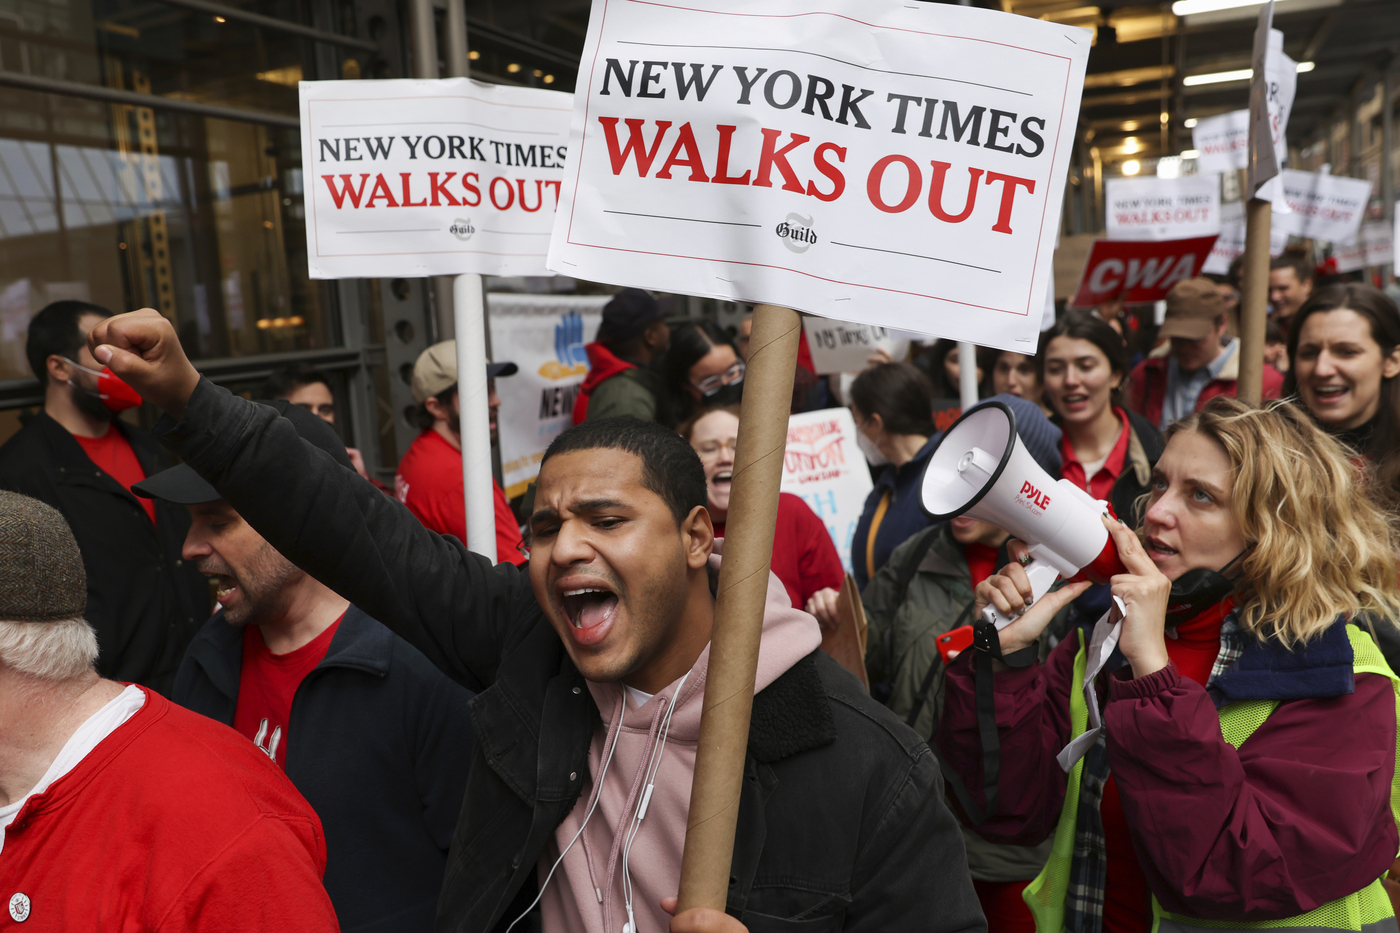 Hundreds of New York Times journalists and other staff picket outside the Times' office after walking off the job for 24 hours, frustrated by contract negotiations that have dragged on for months in the newspaper's biggest labor dispute in more than 40 years, Thursday, Dec. 8, 2022, in New York. (AP Photo/Julia Nikhinson)